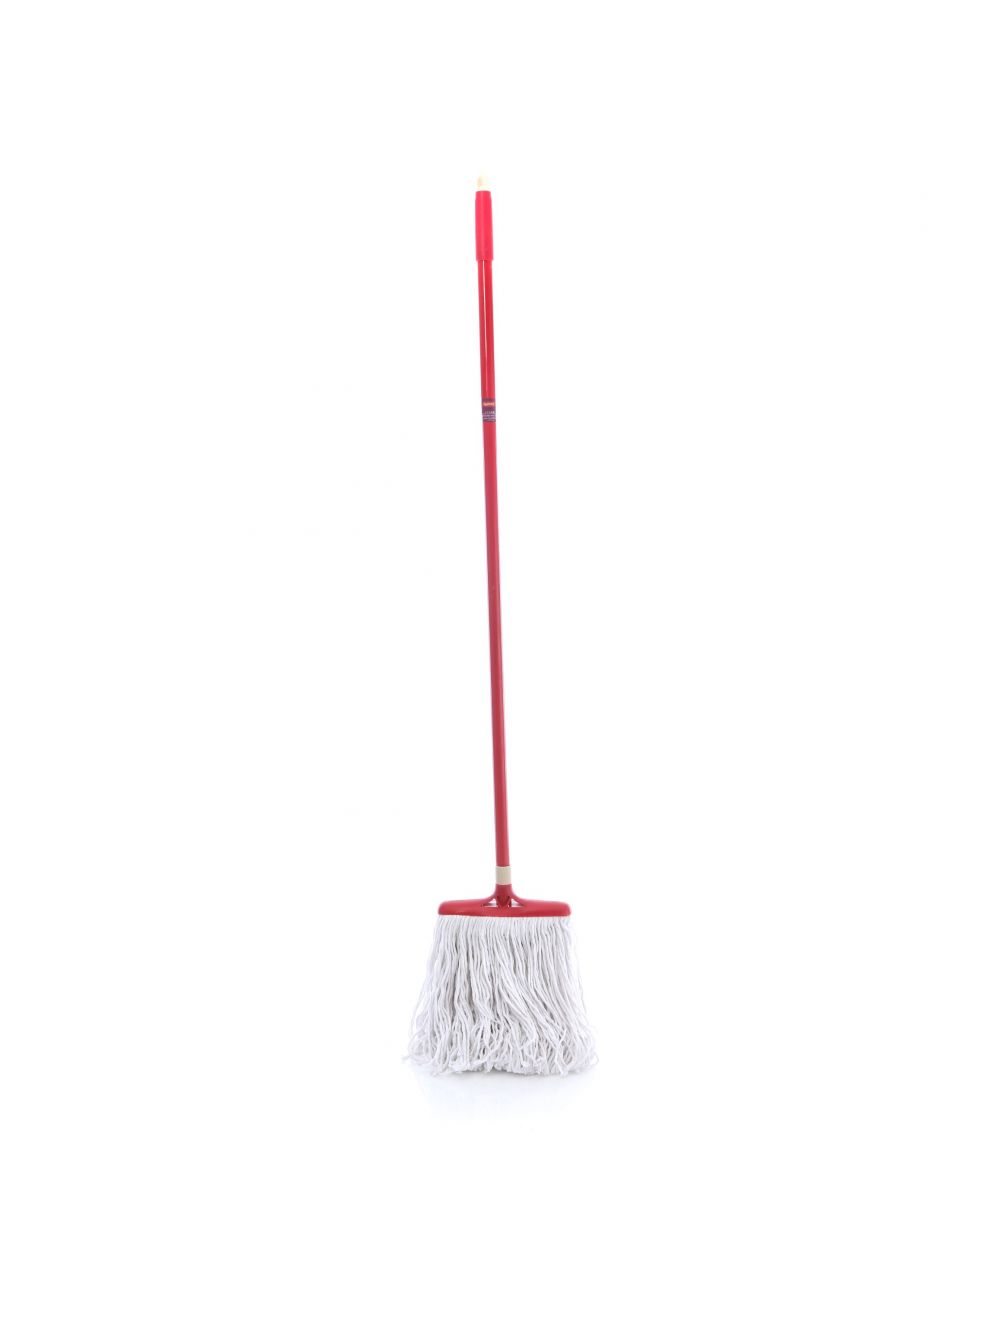 Royalford RF5826 Cotton String Mop with Plastic Handle